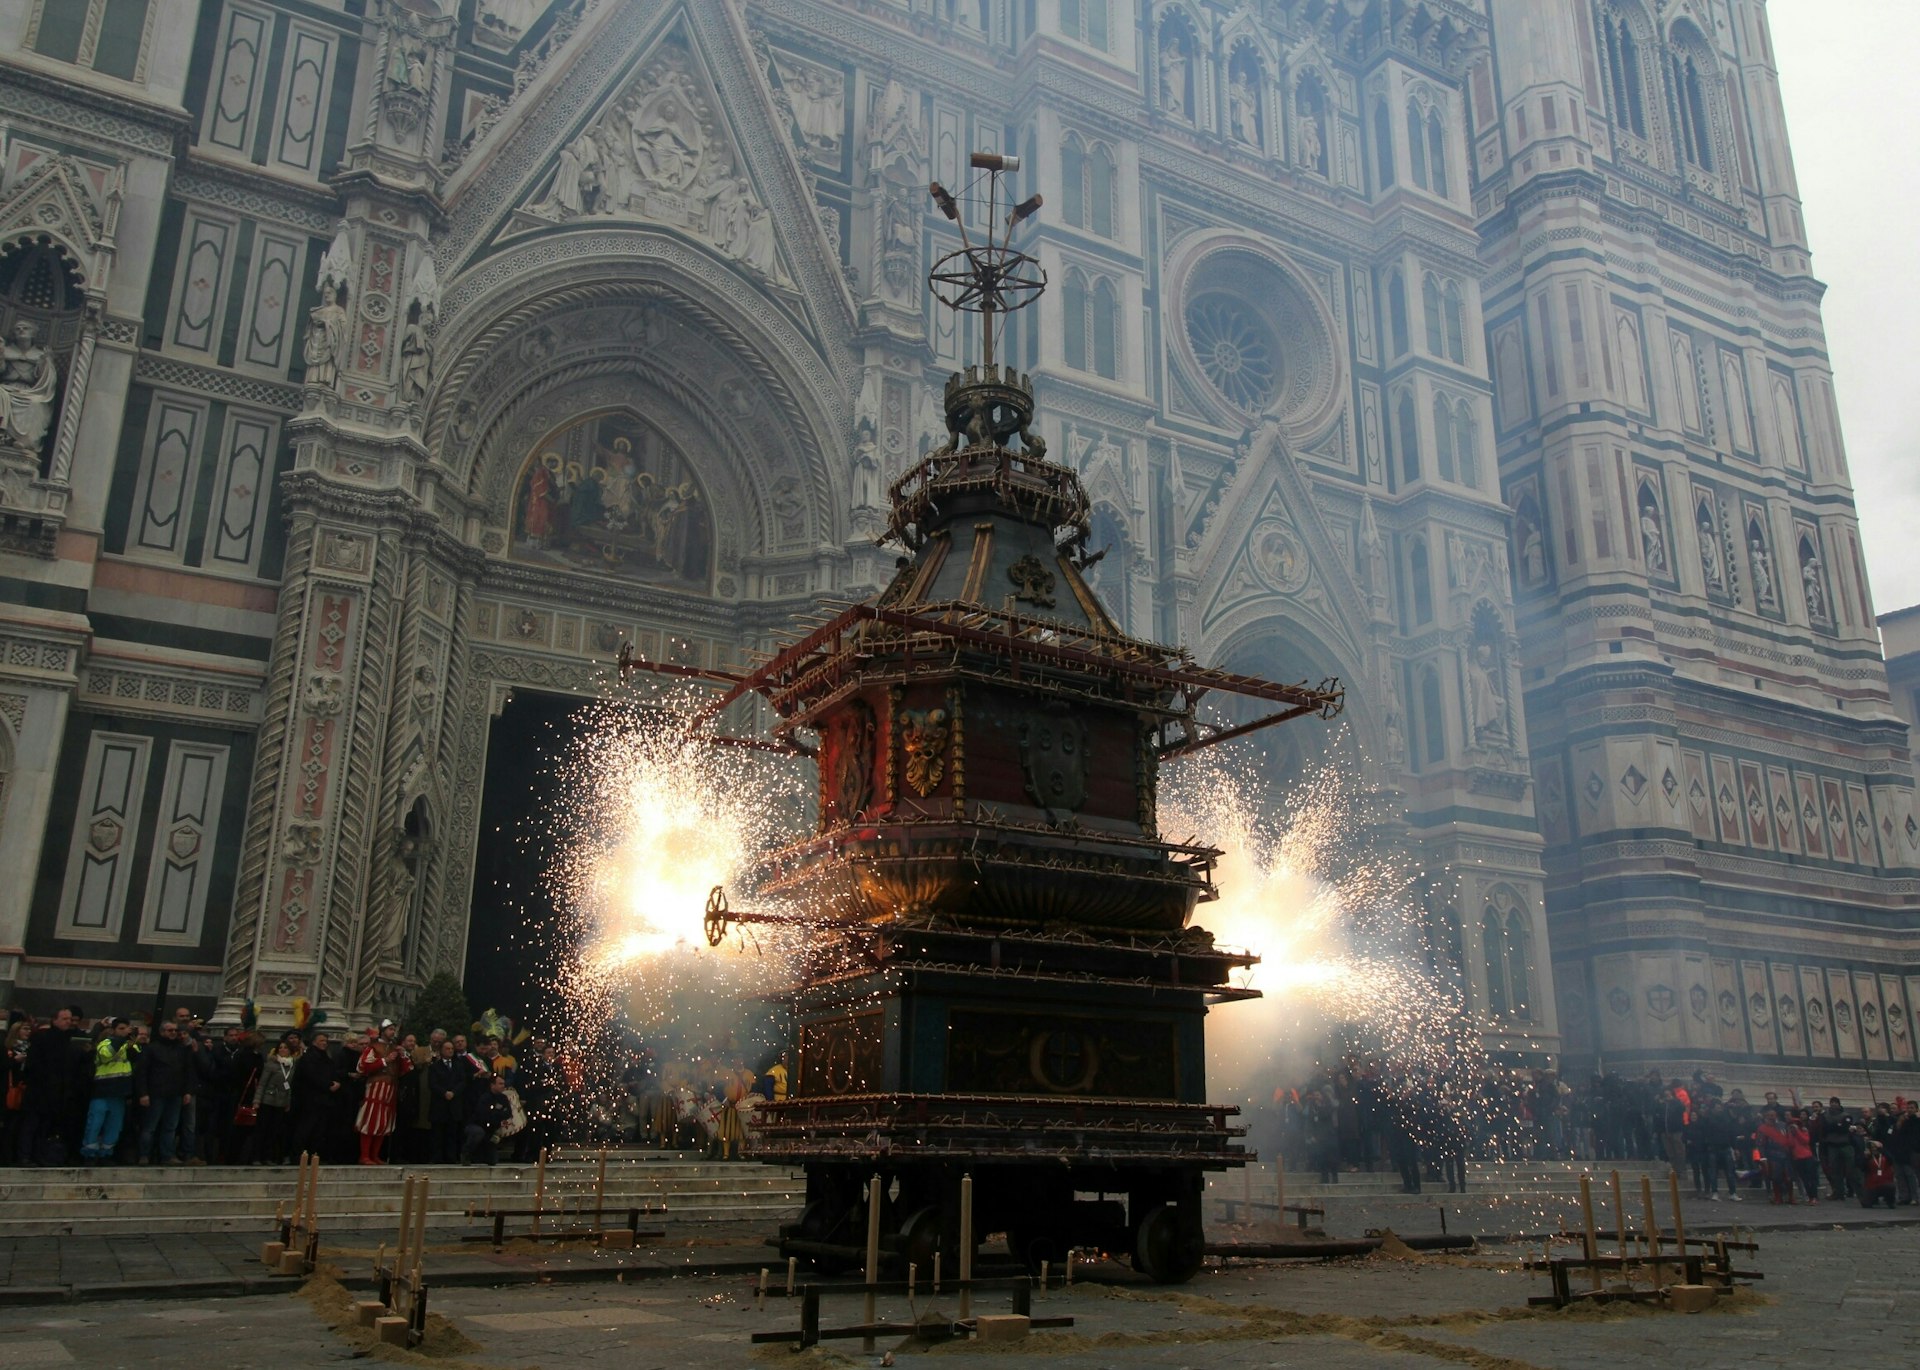 Easter Sunday fireworks in front of the Duomo in Florence, Italy